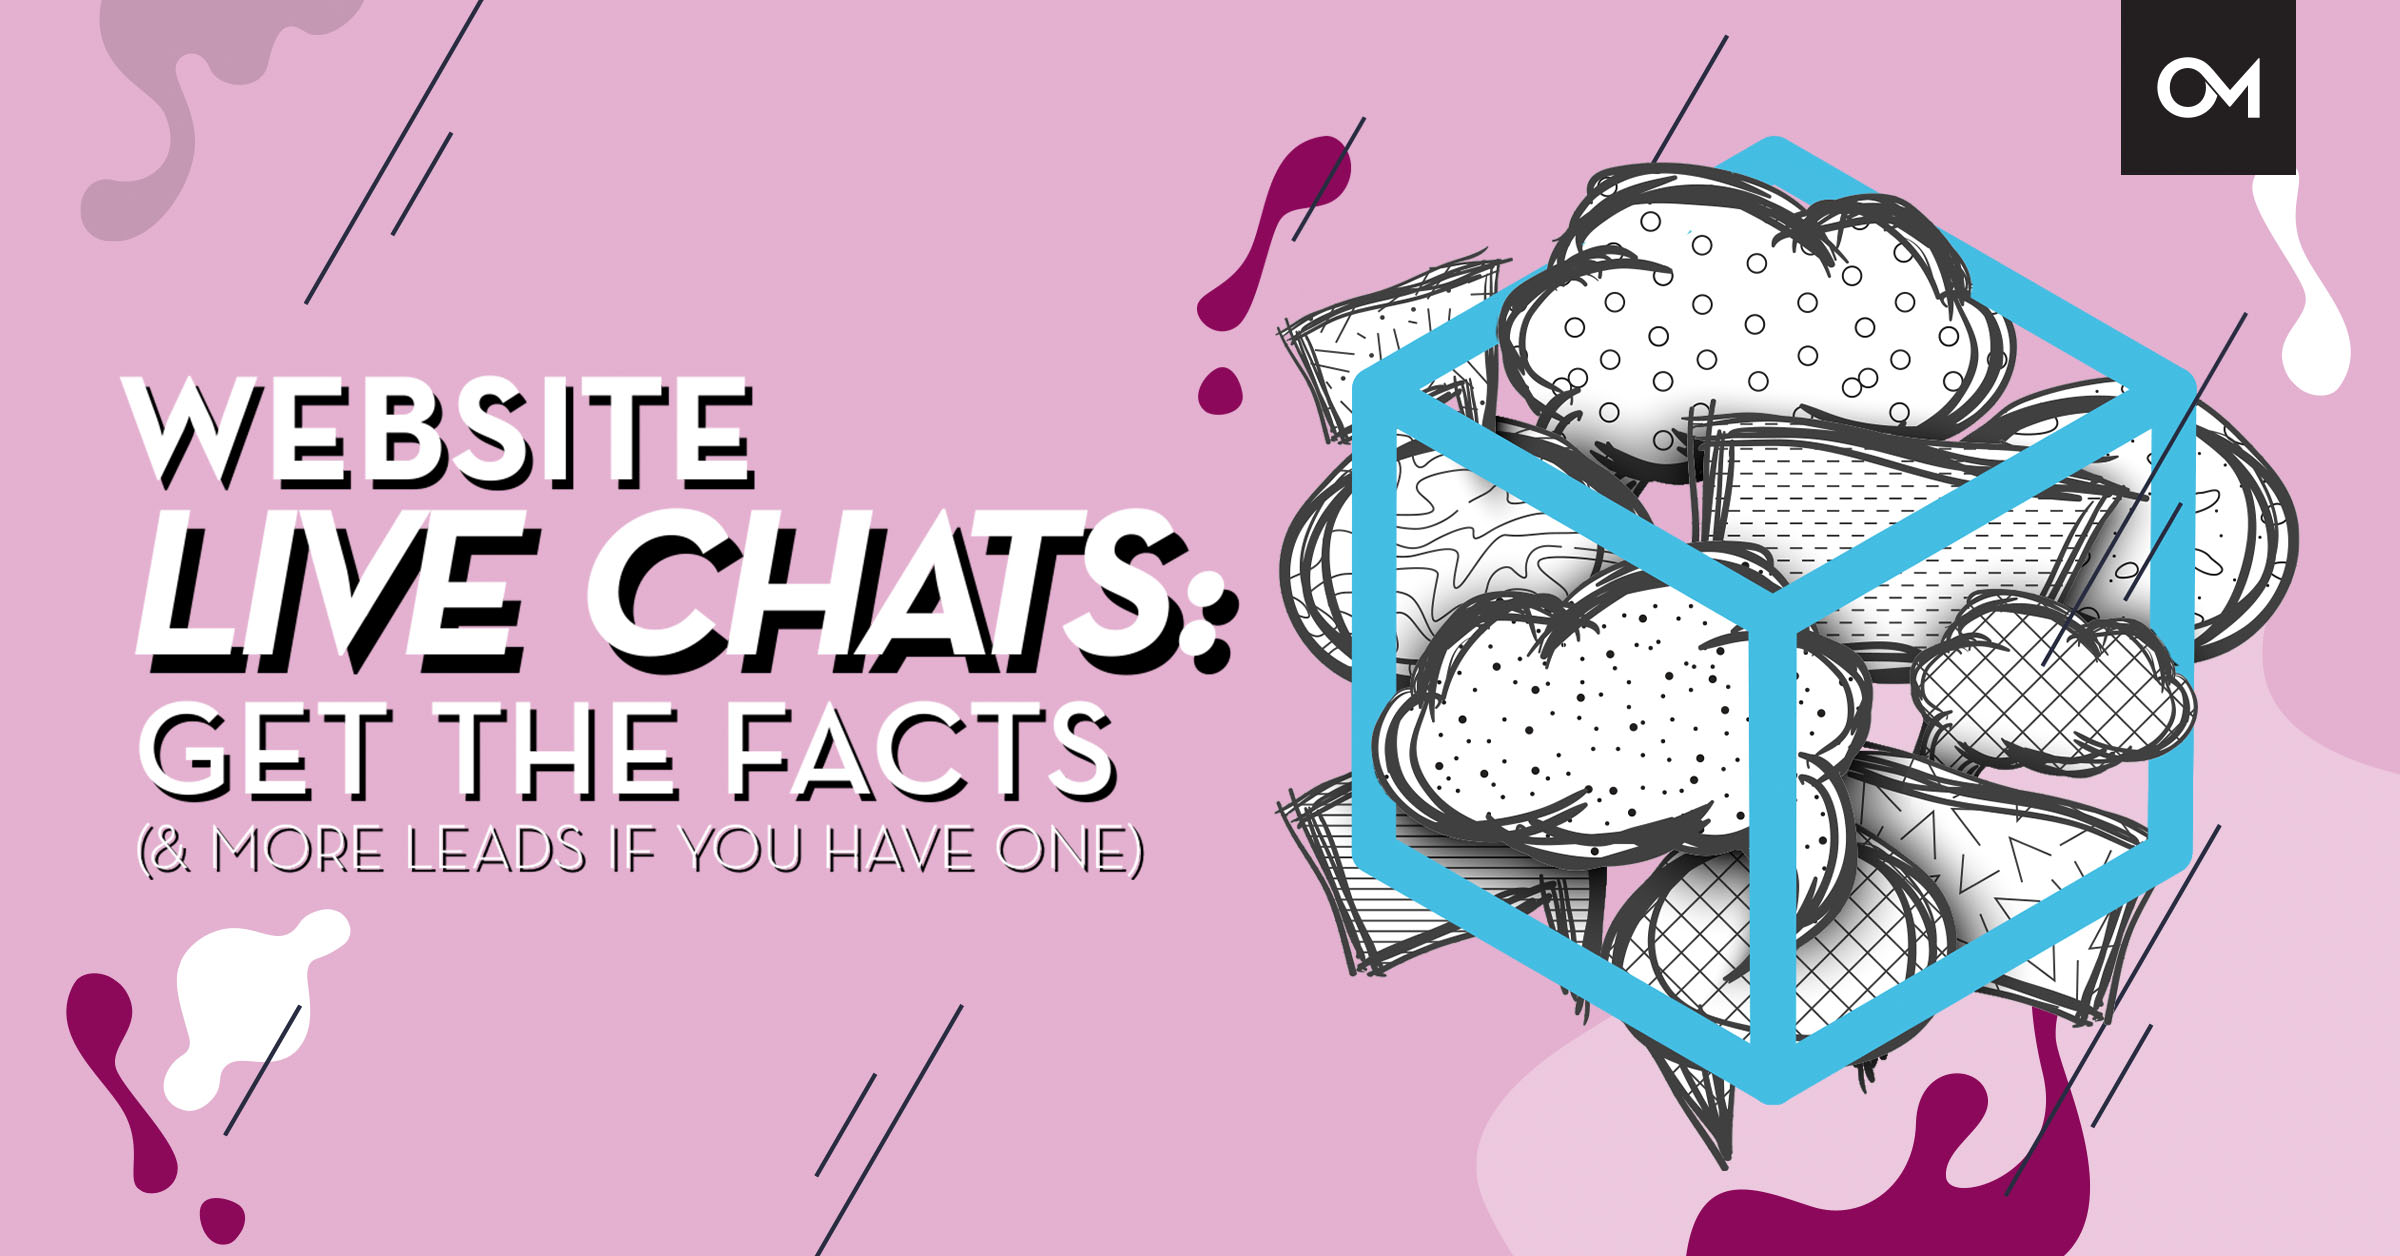 Website Live Chats: Get the Facts